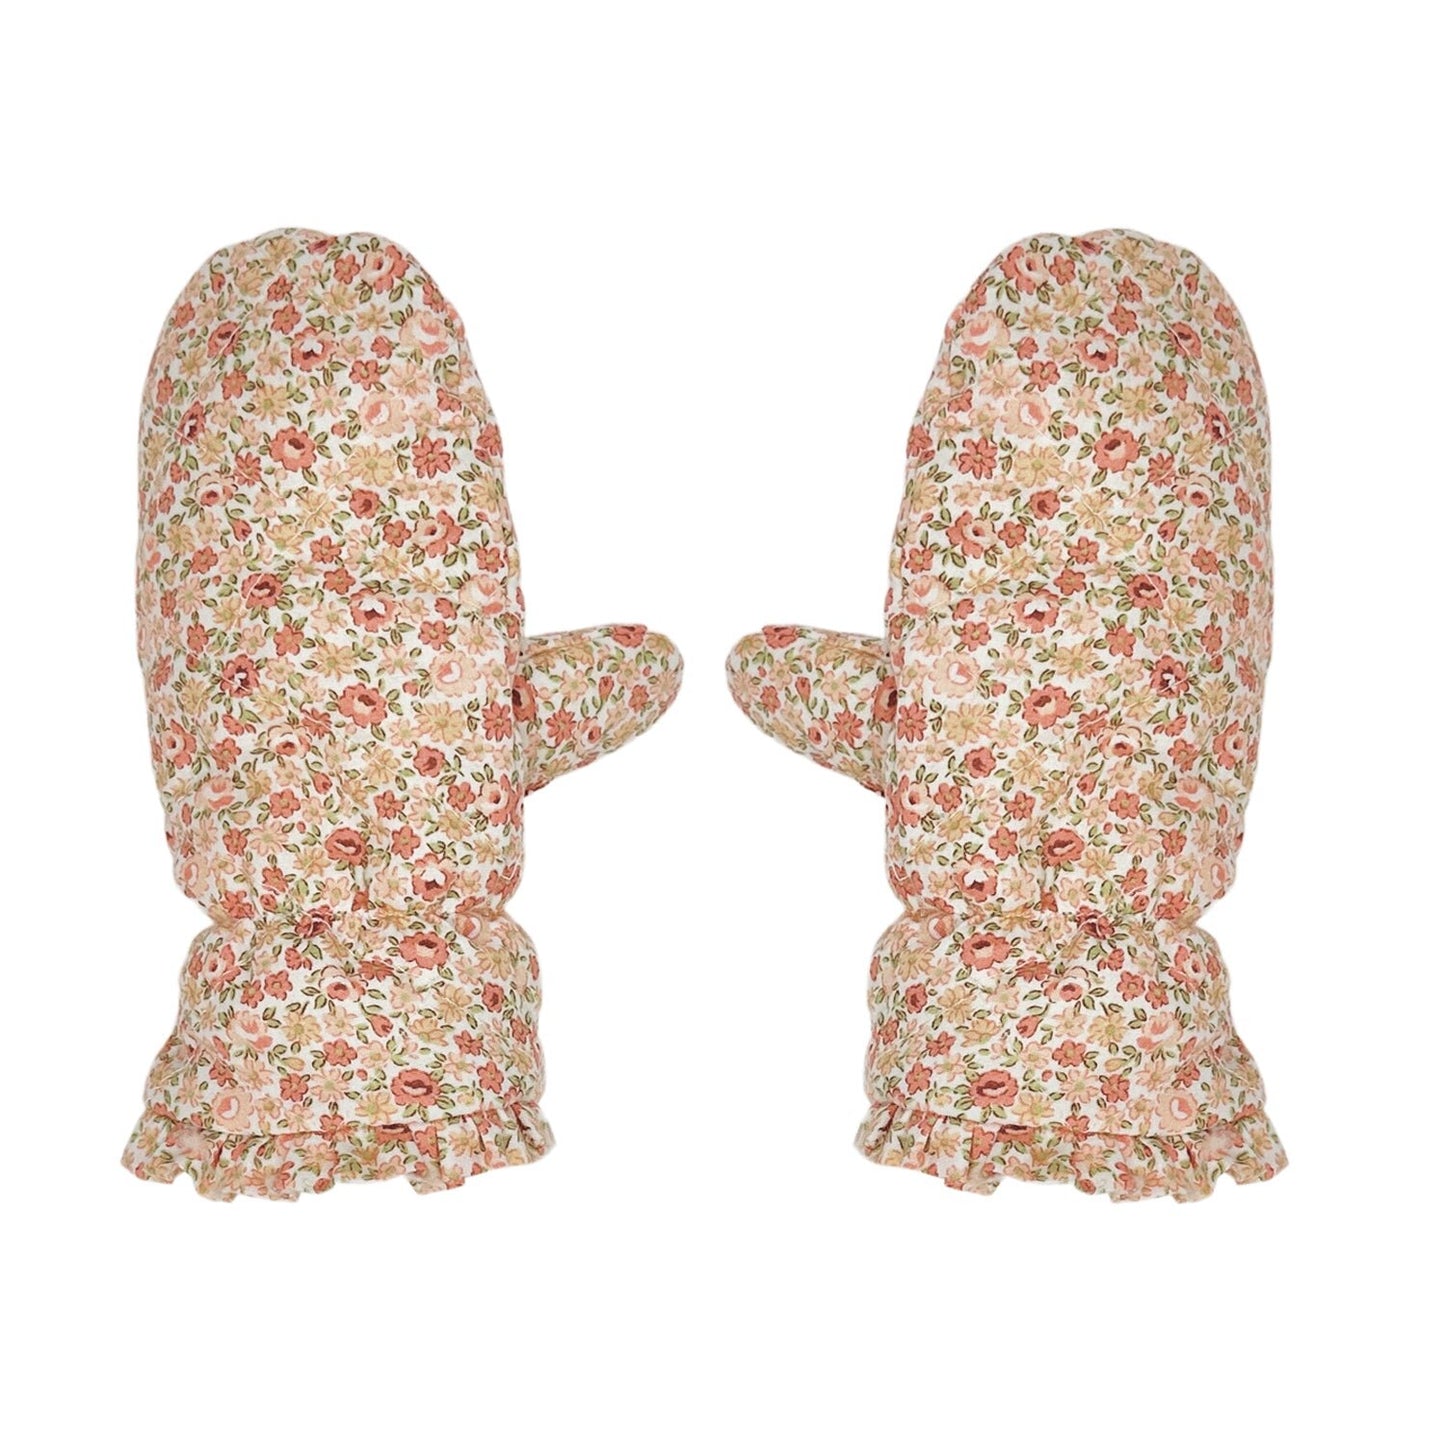 Margot Floral Quilted Mittens Age 3 - 6